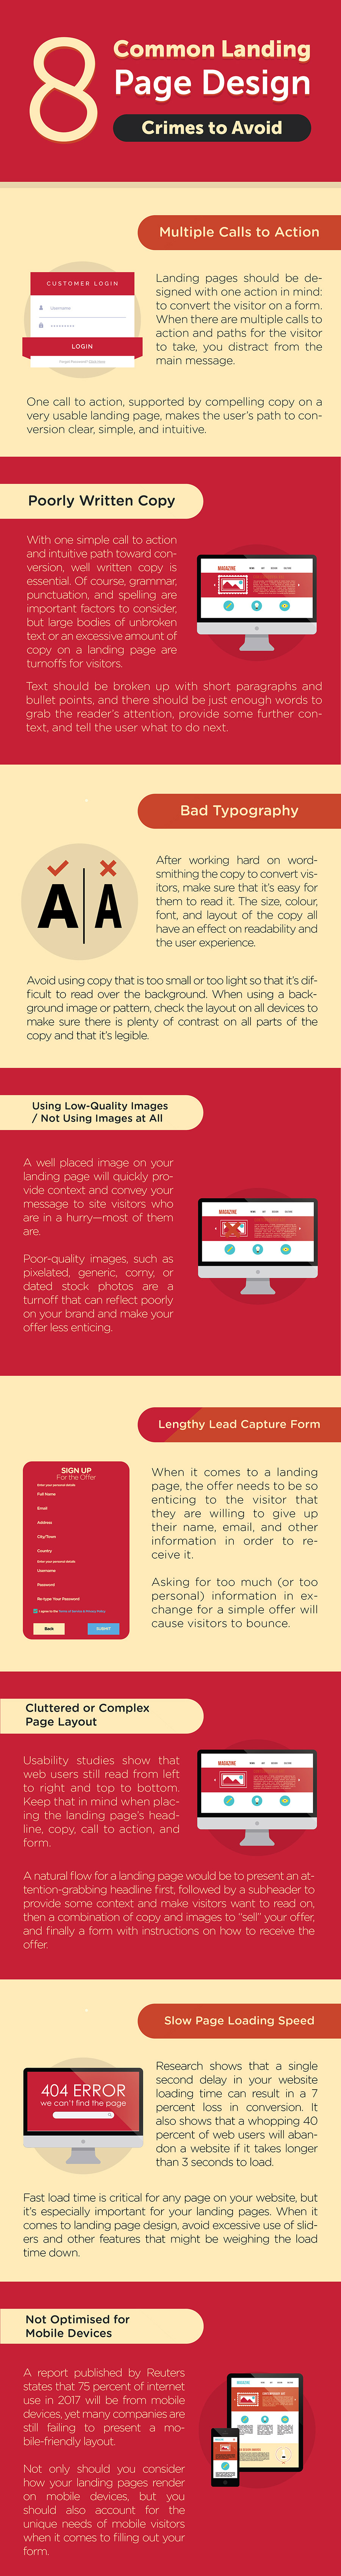 Landing Page PPC Infographic